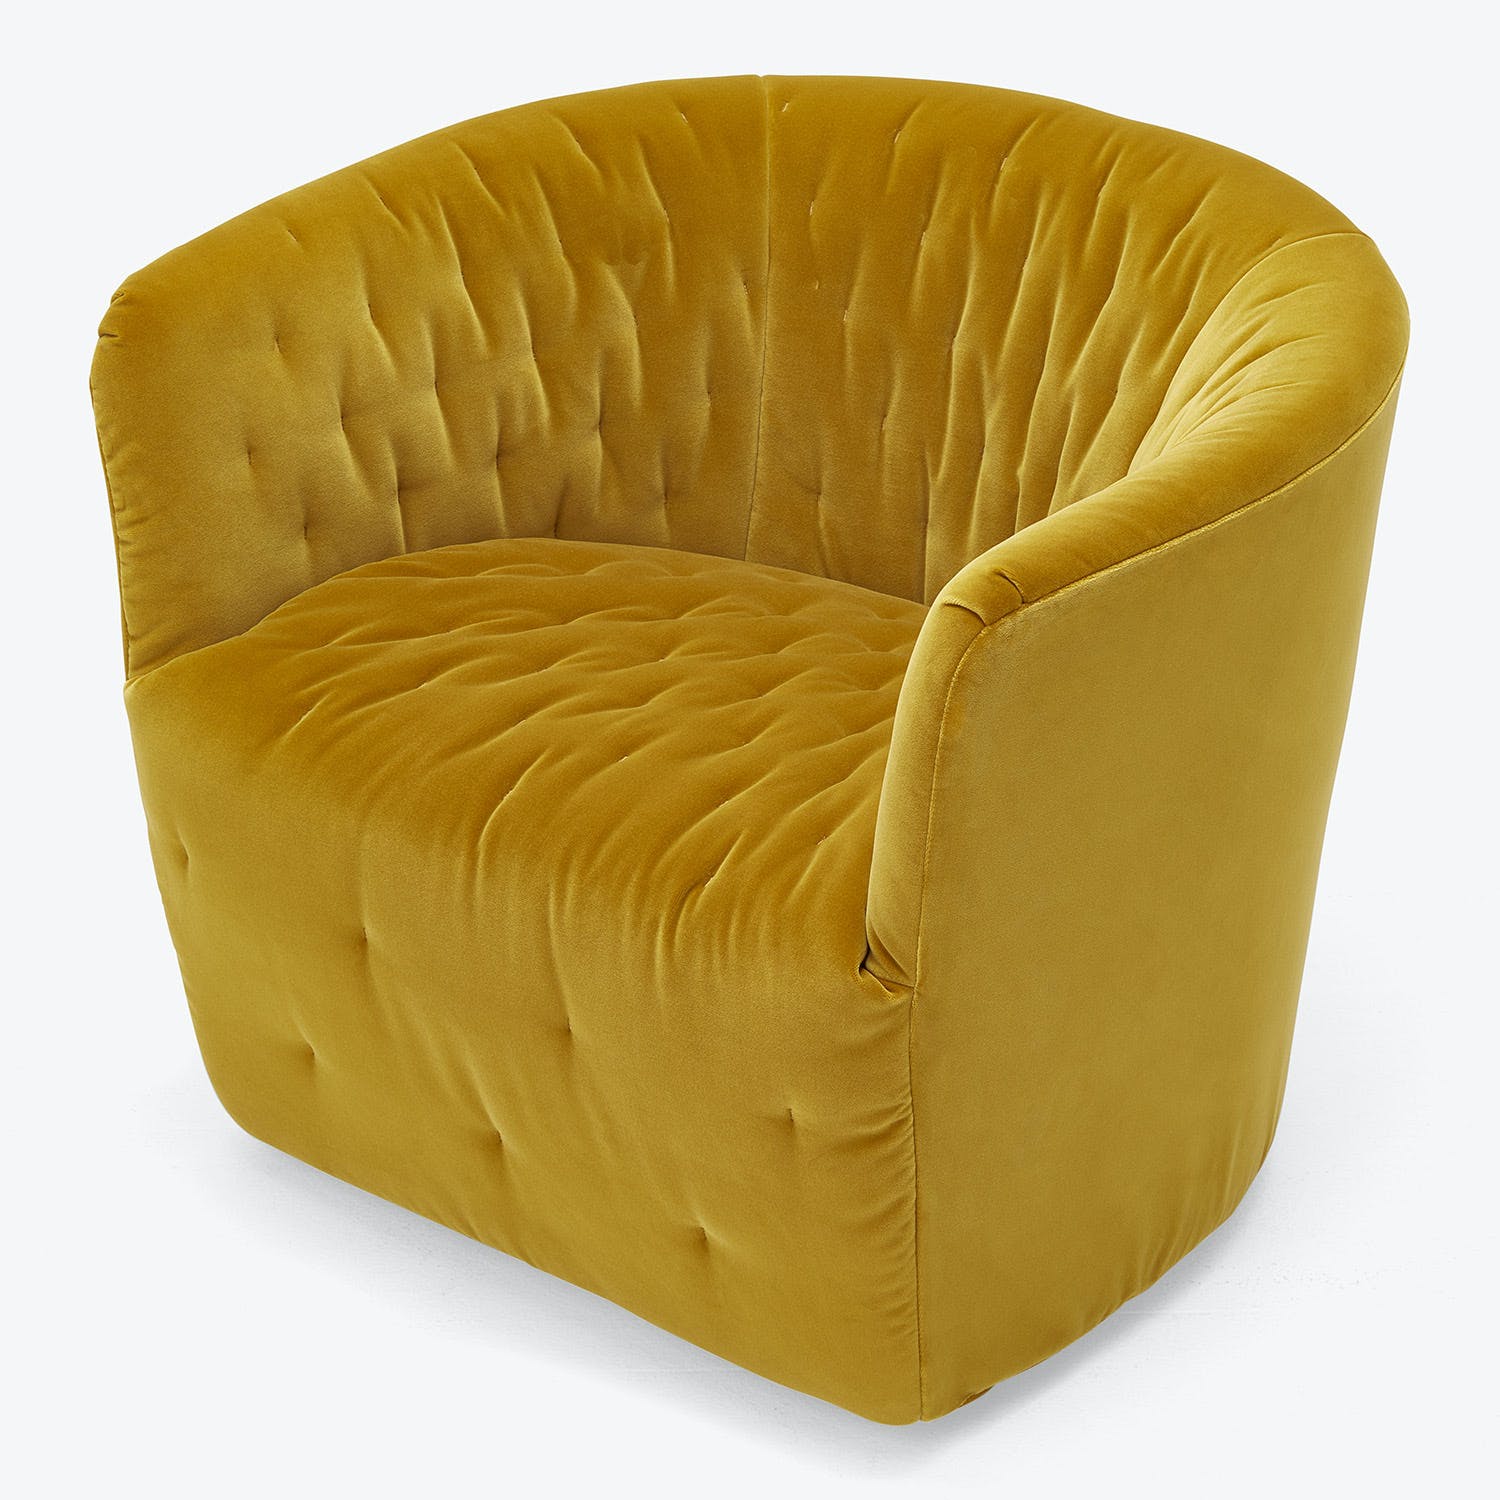 Mustard yellow velvet accent chair with tufted back and seat